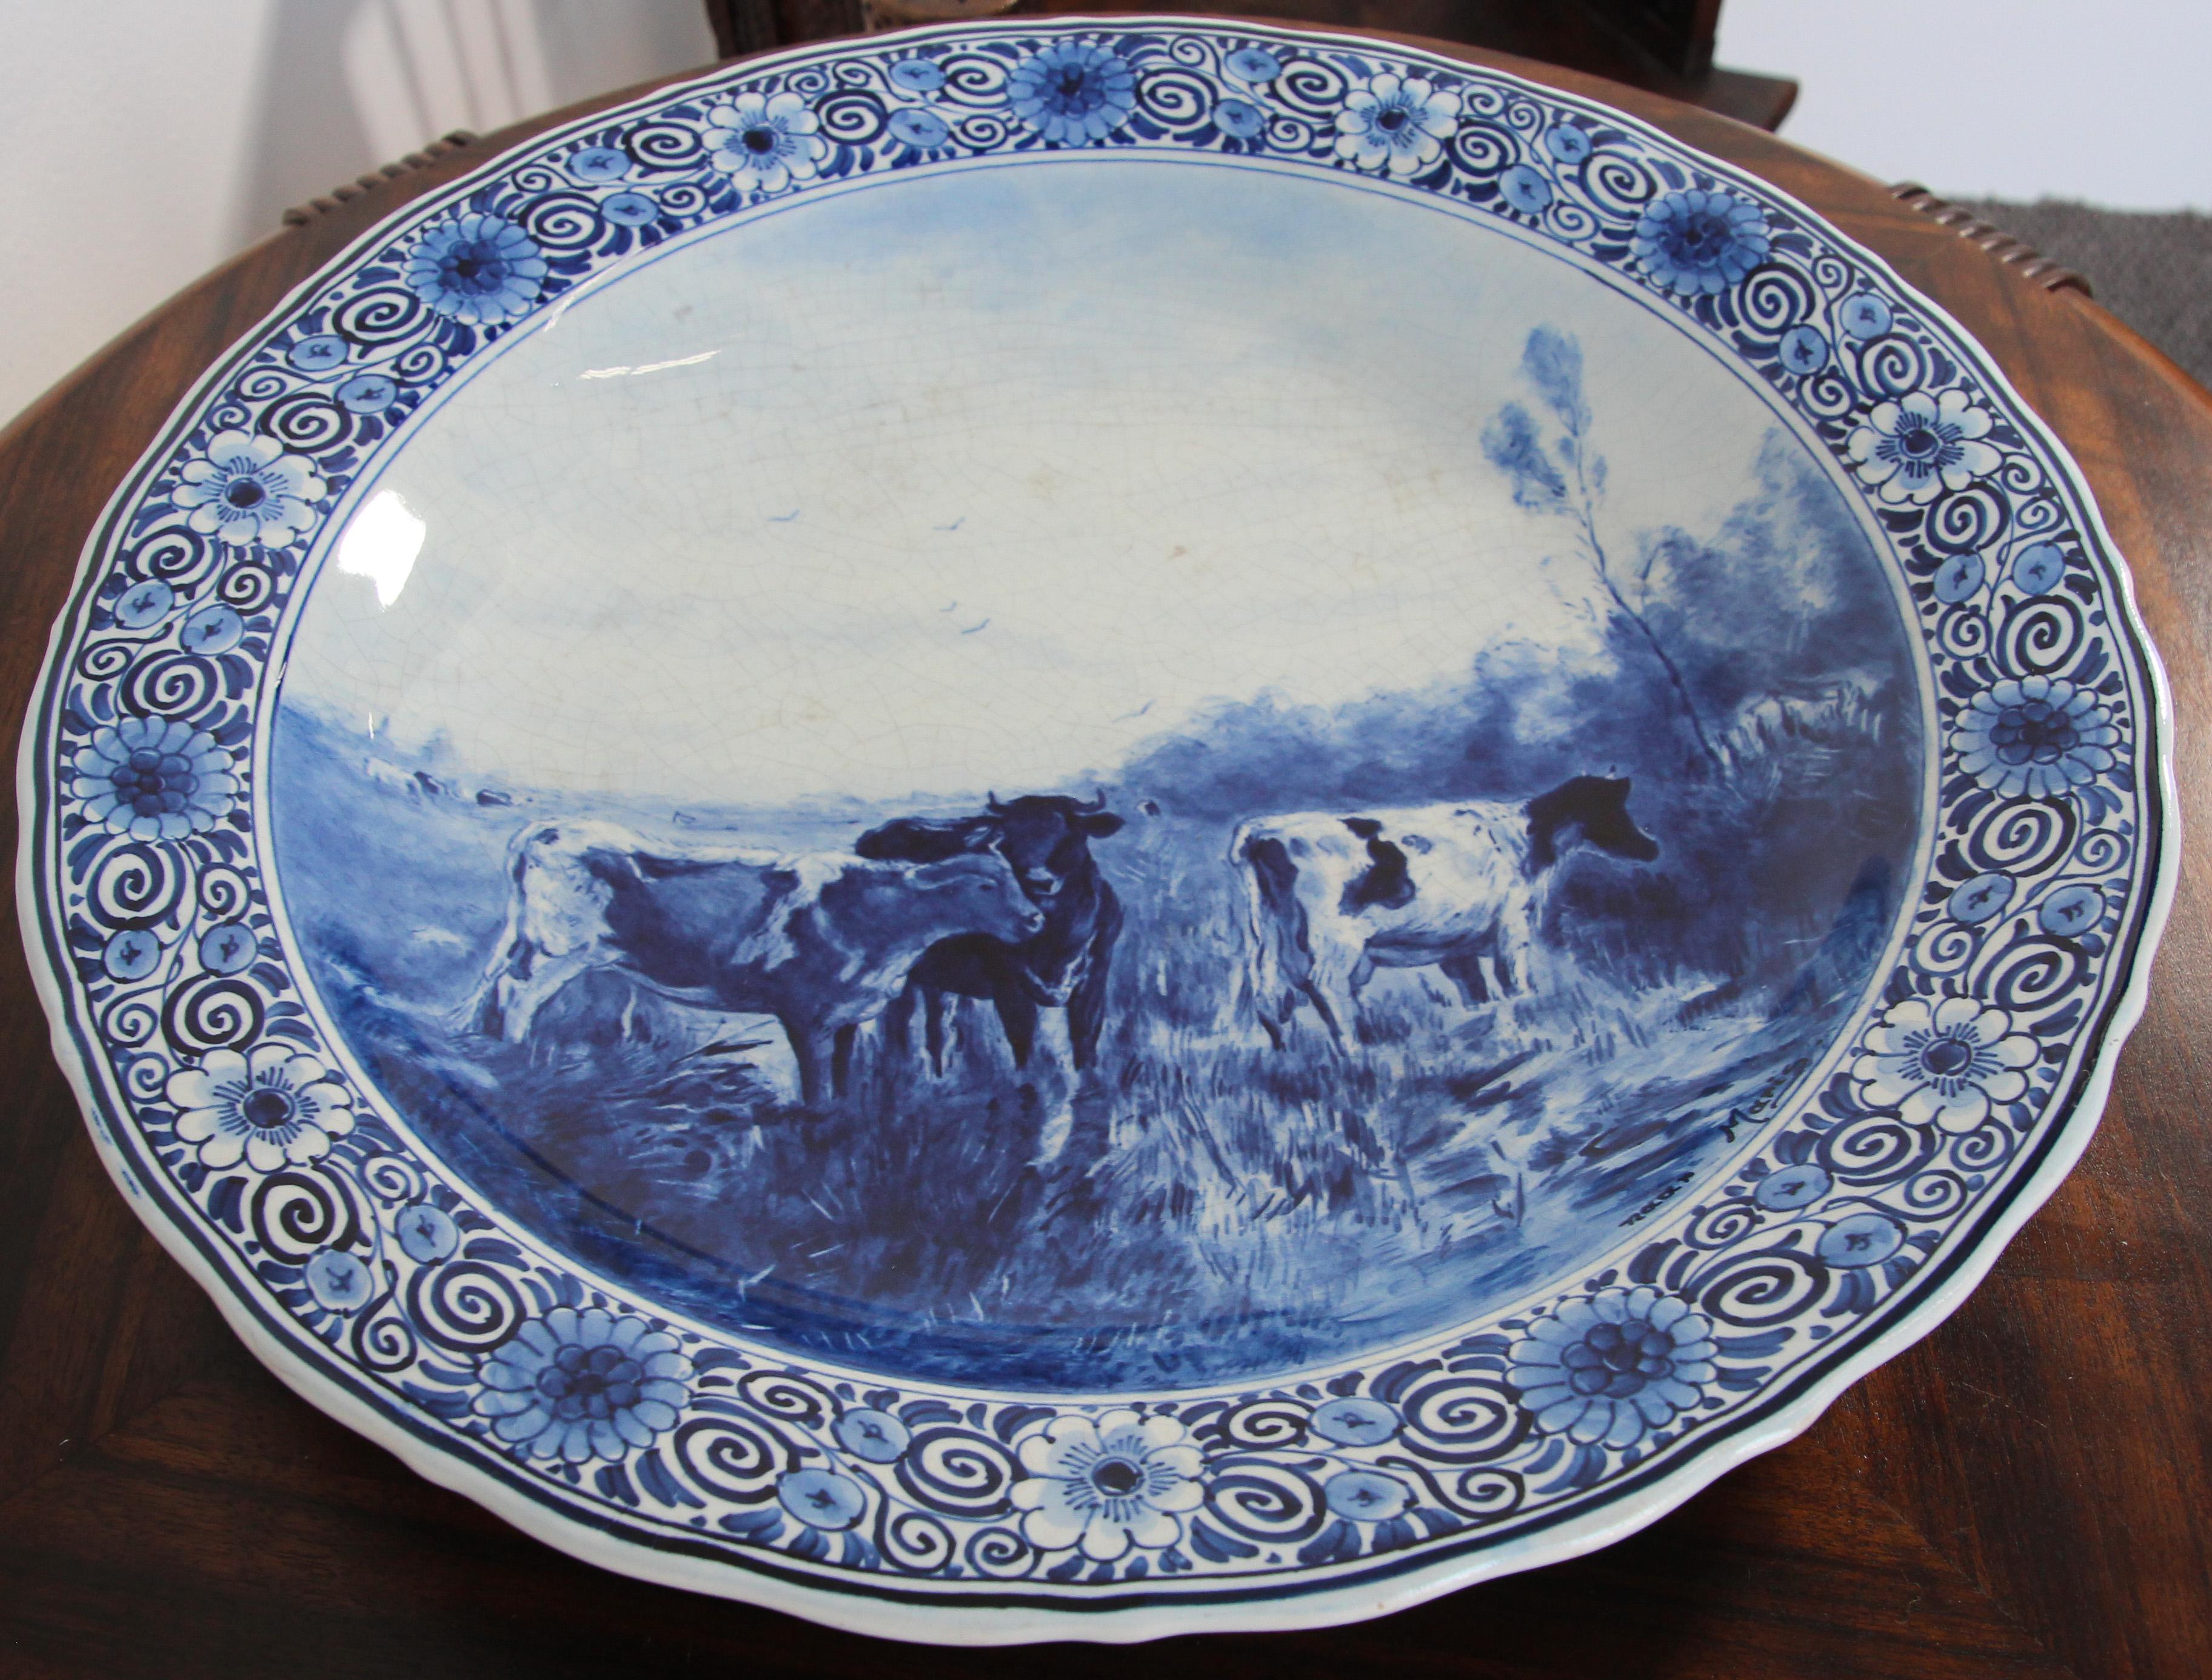 Stunning large Boch Delfts blue and white hanging decorative plate.
Beautiful charger, the painting depicts cows in the field. 
It is signed by the artist in the lower right corner.
It is beautiful hanging on a wall and really stands out in a